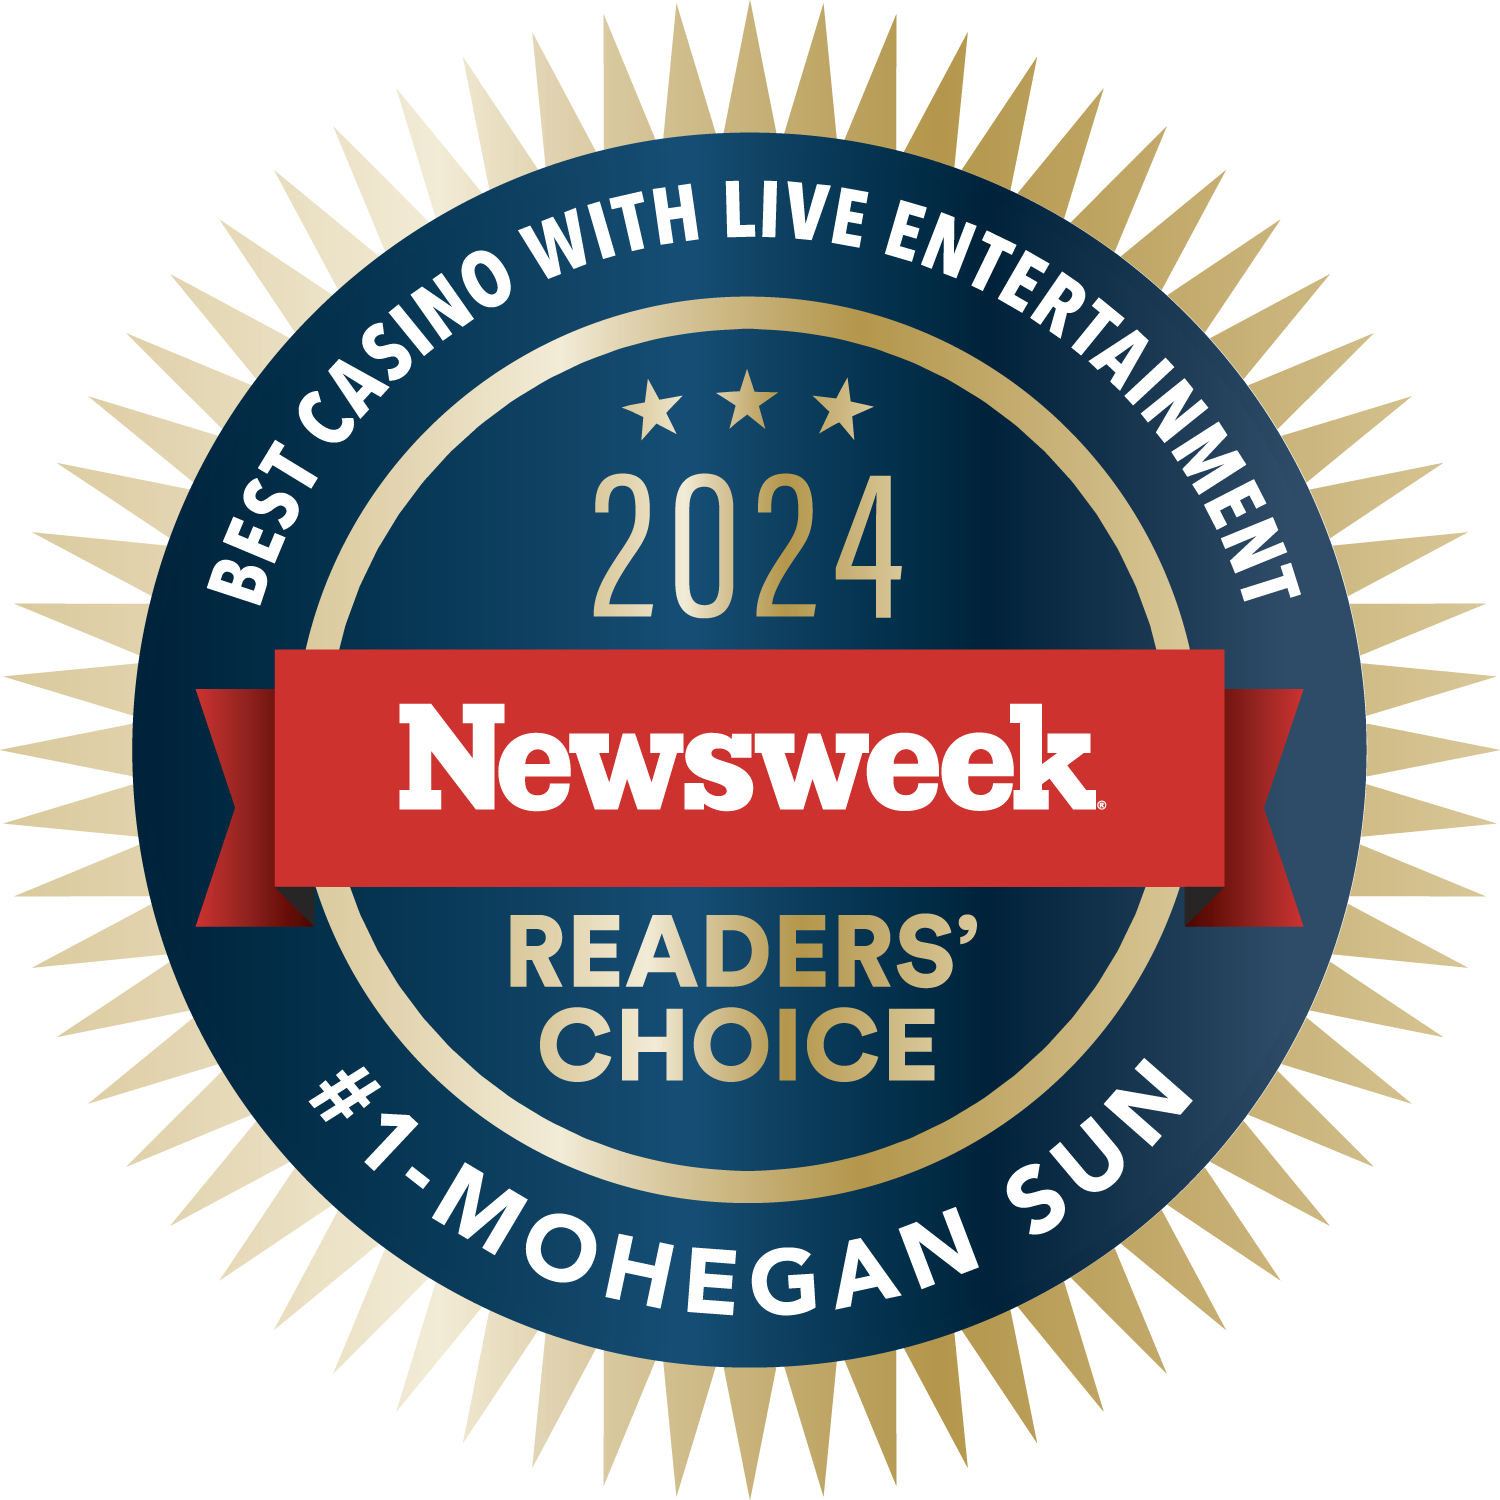 Mohegan Sun Named “Best Casino with Live Entertainment” in the 2024